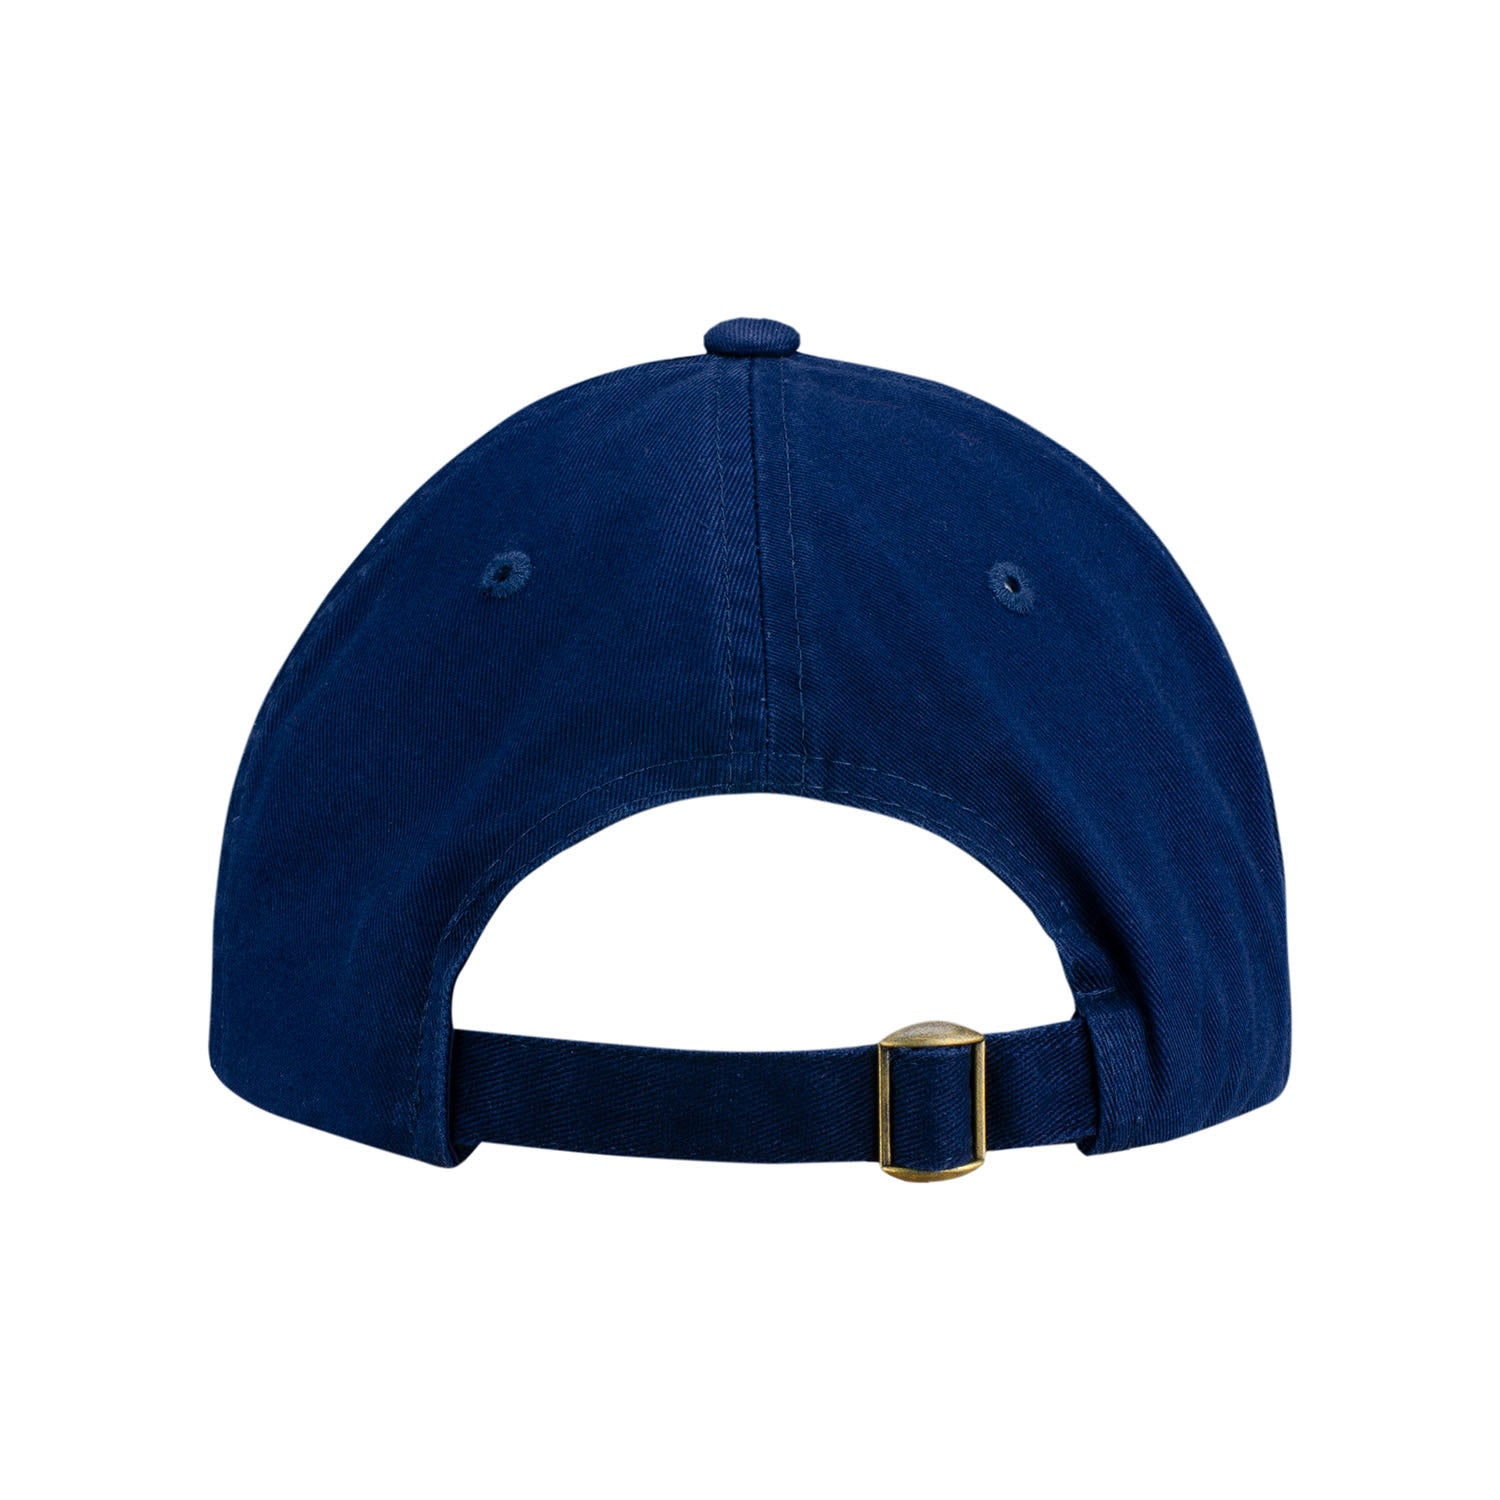 Guangzhou Charge Blue Dad Hat - Back View